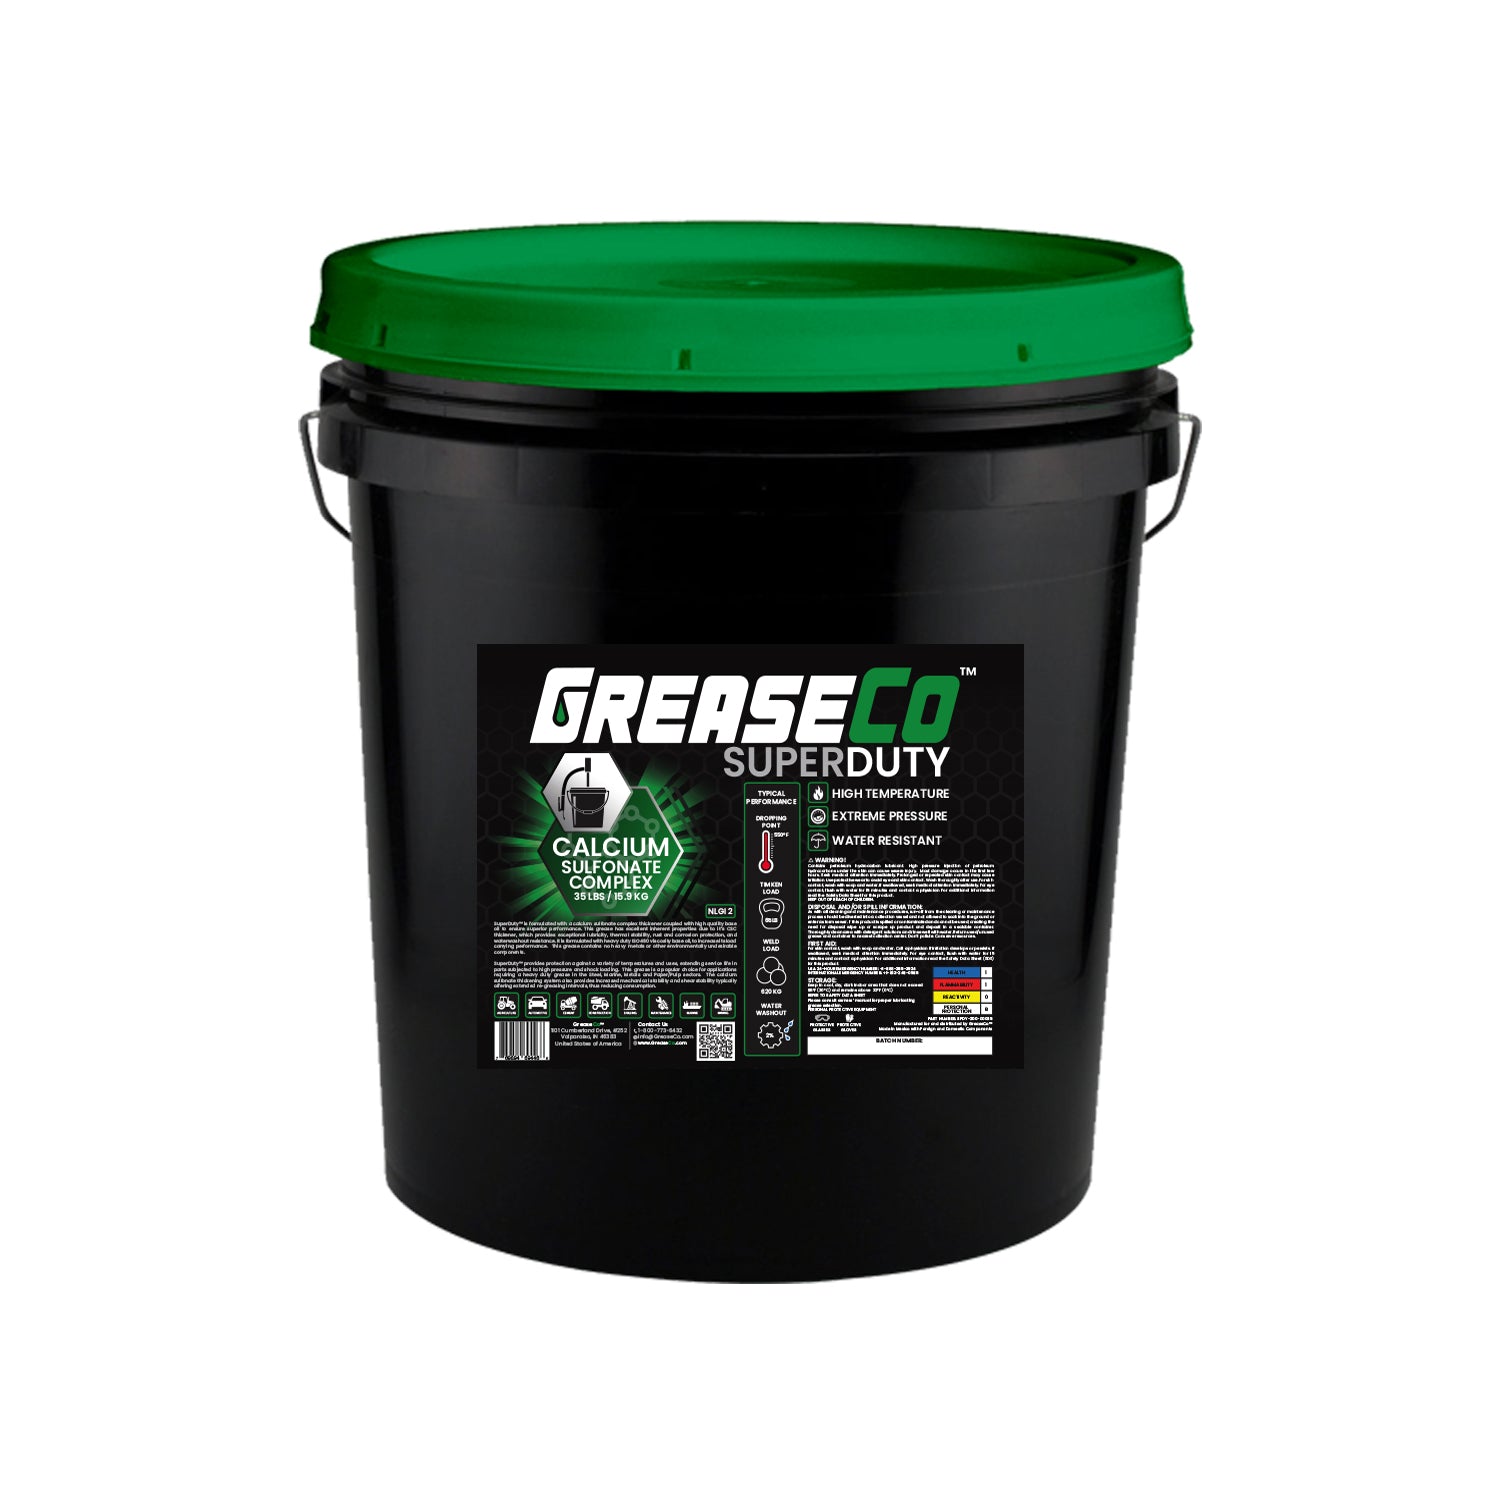 Calcium Sulfonate High Temp High Performance Grease 35 LB Pail of GreaseCo SuperDuty